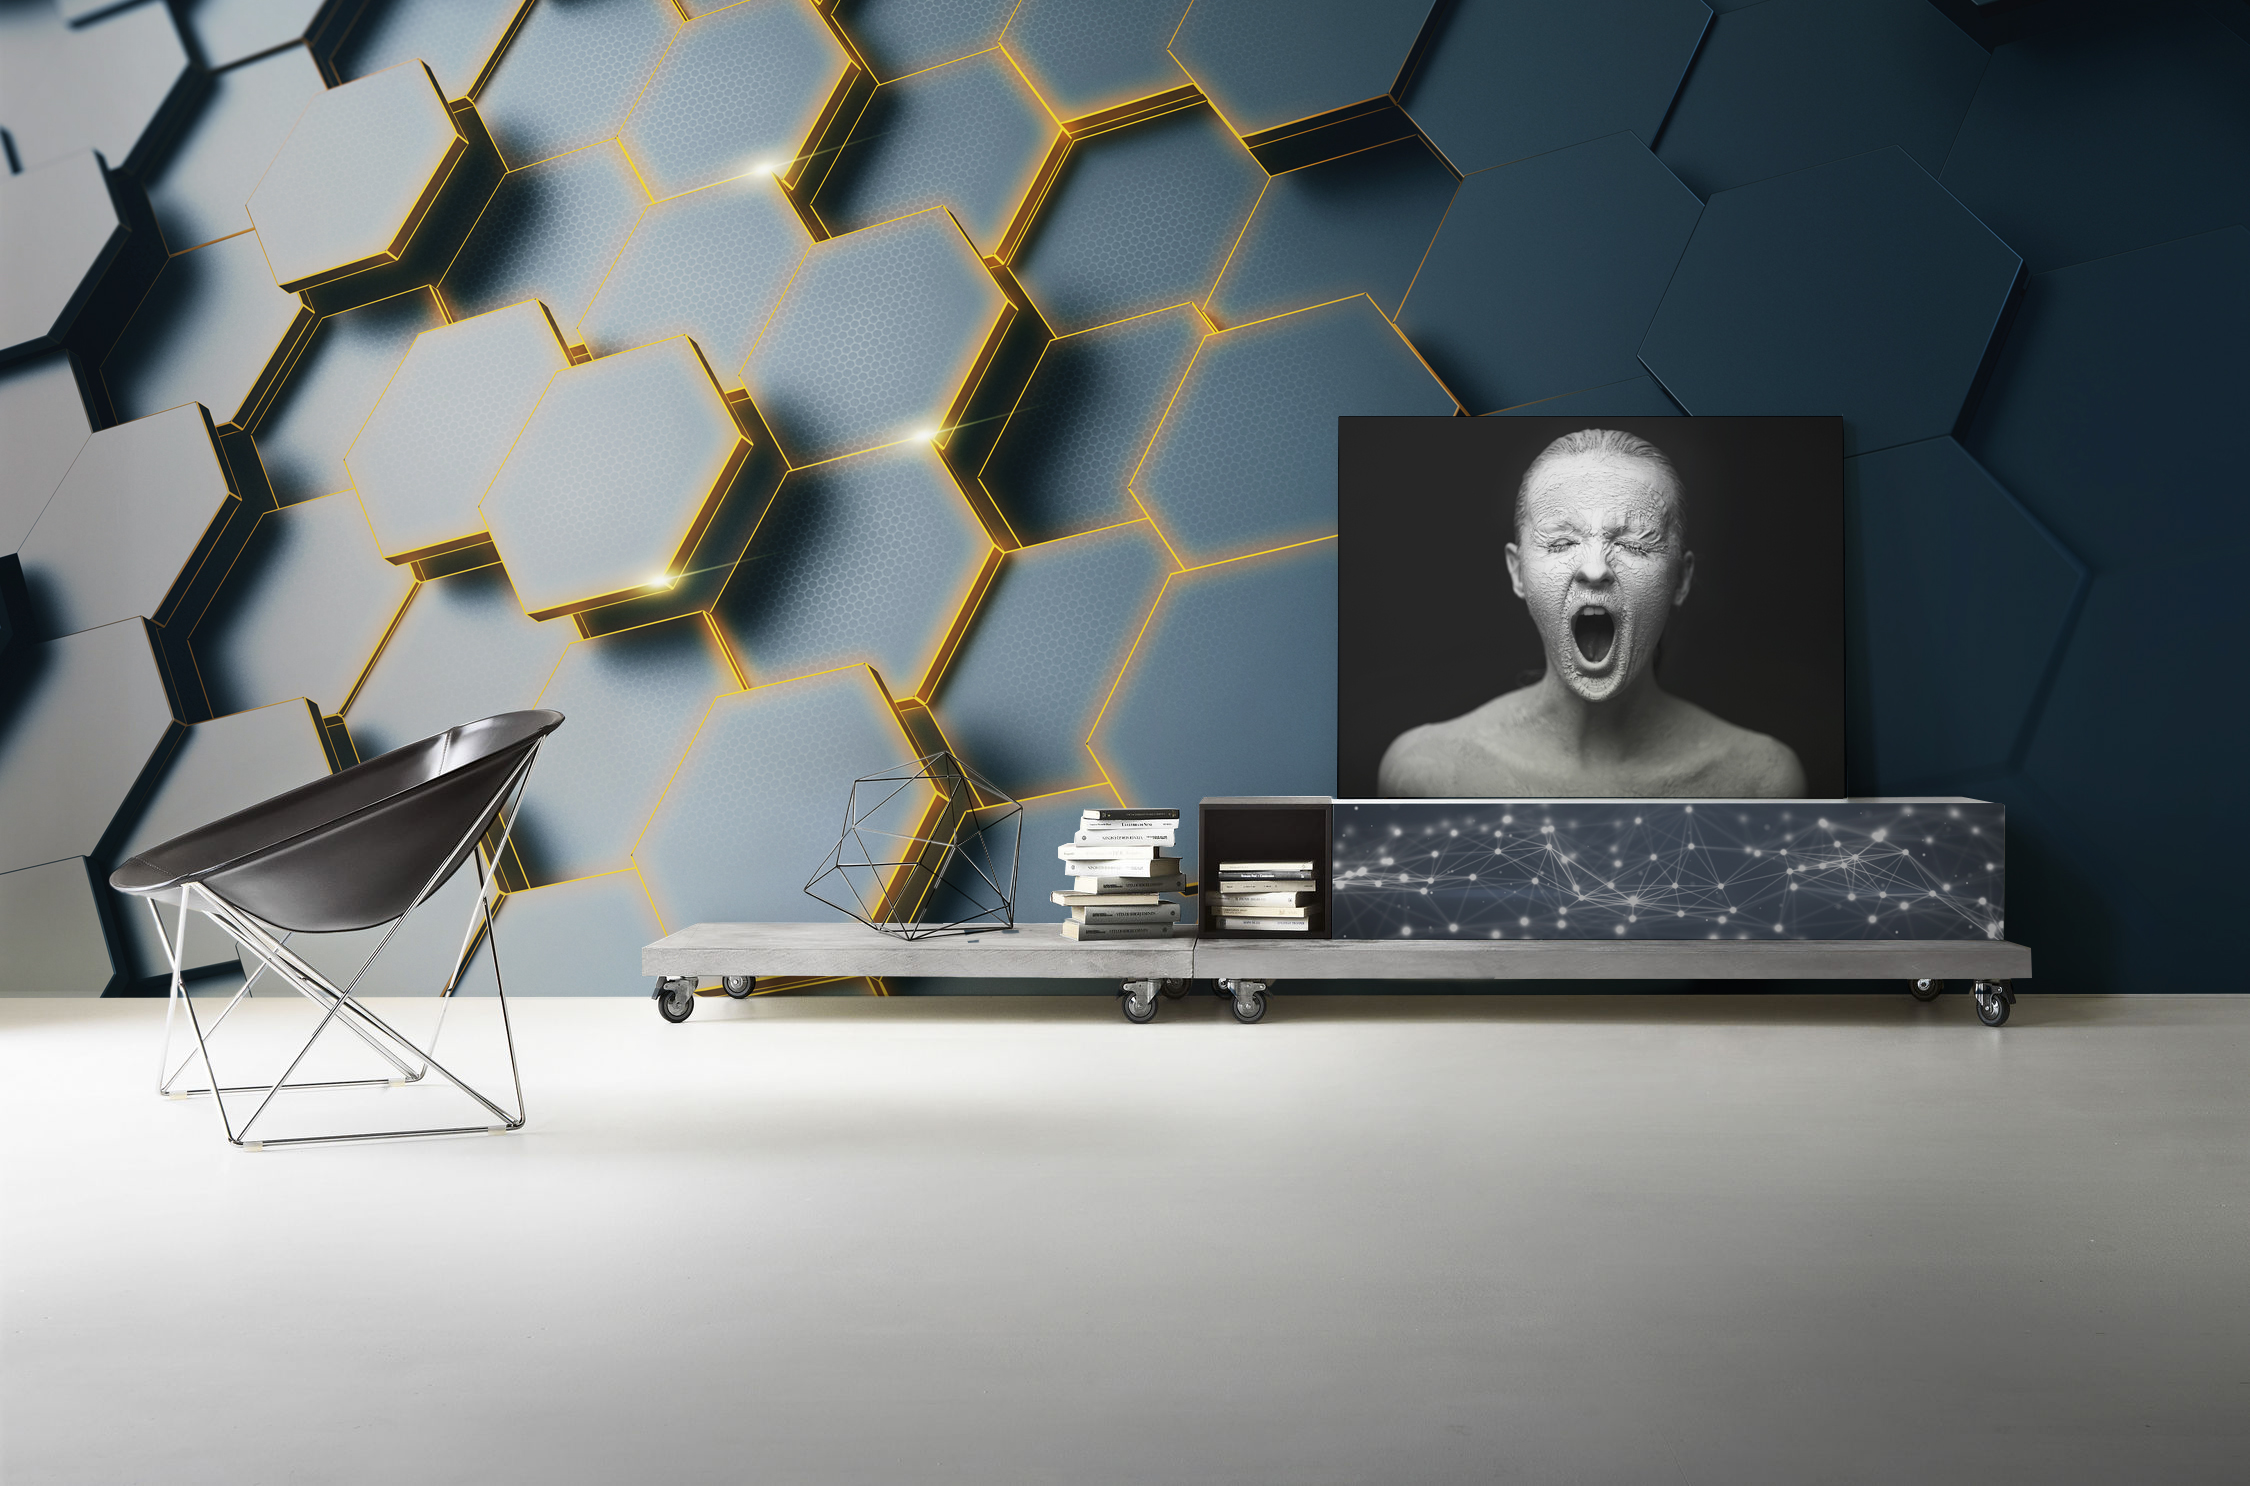 Scream • Living room - Futuristic - Wall Murals - Prints - Stickers - Abstraction - People